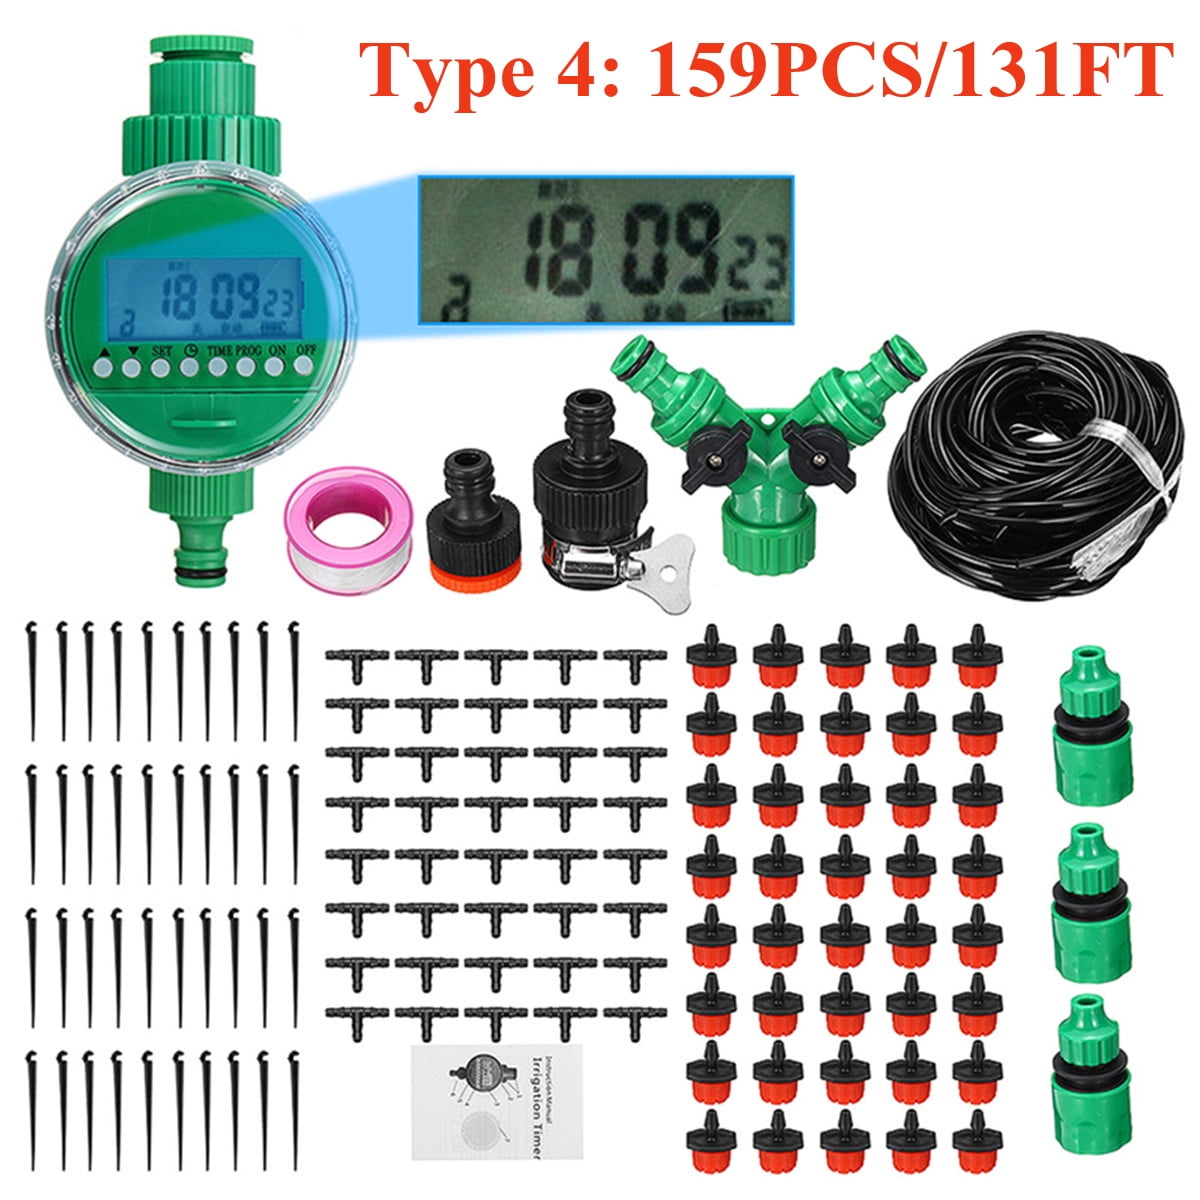 40m/50m Hose Drip Irrigation Water Irrigation System + Auto Timer Hose Kits Garden Lawn Greenhouse Plants Watering Kit